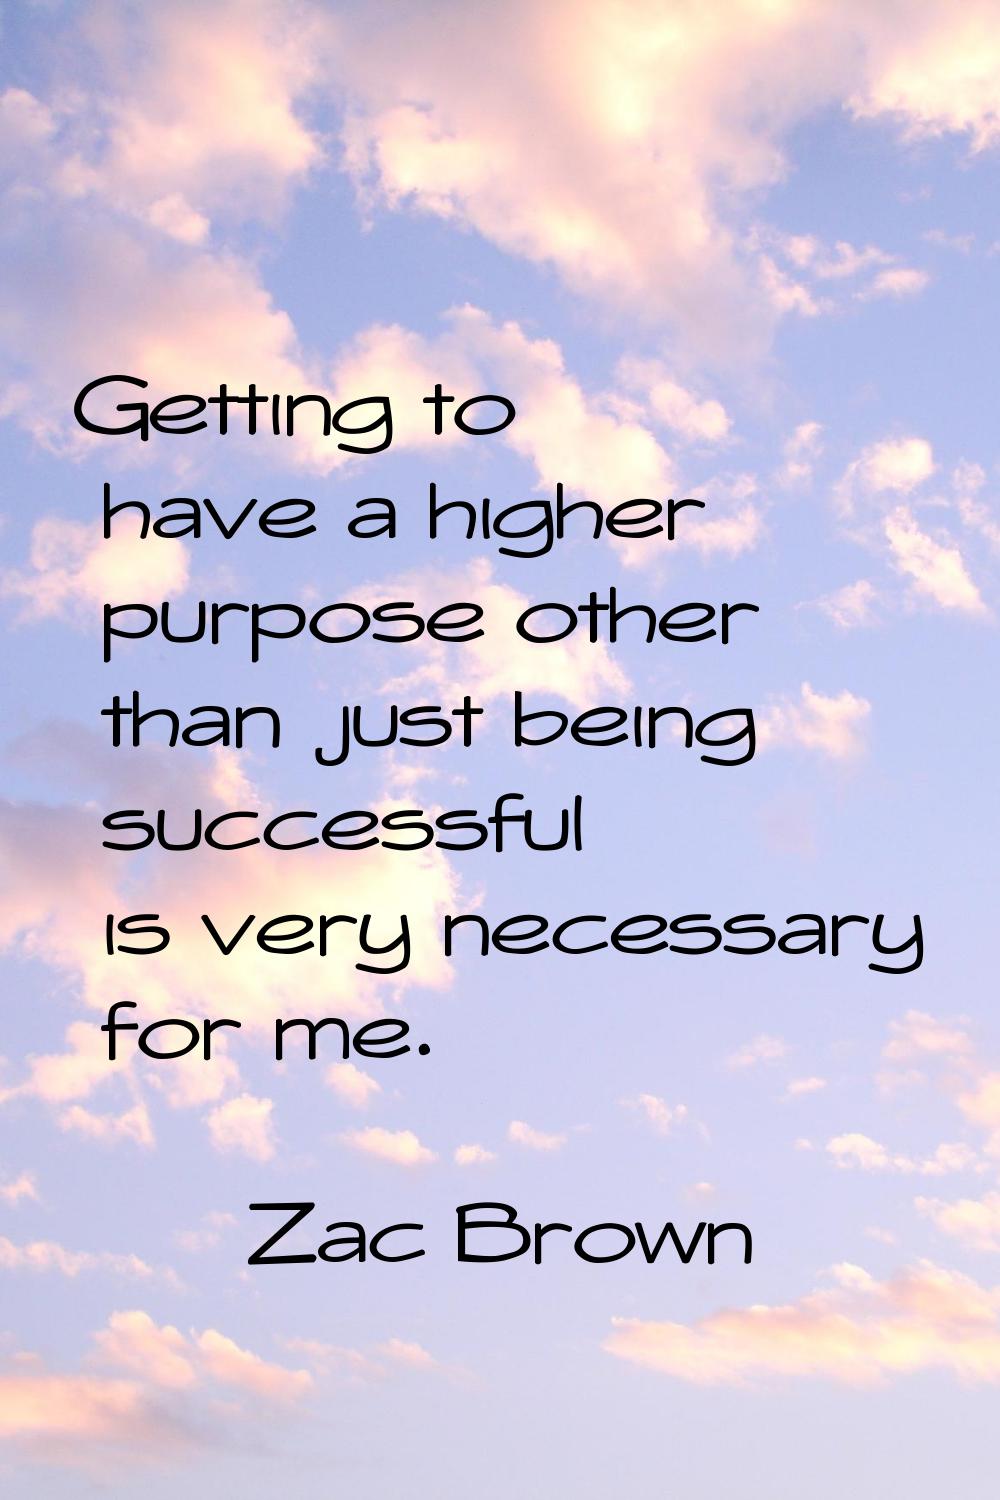 Getting to have a higher purpose other than just being successful is very necessary for me.